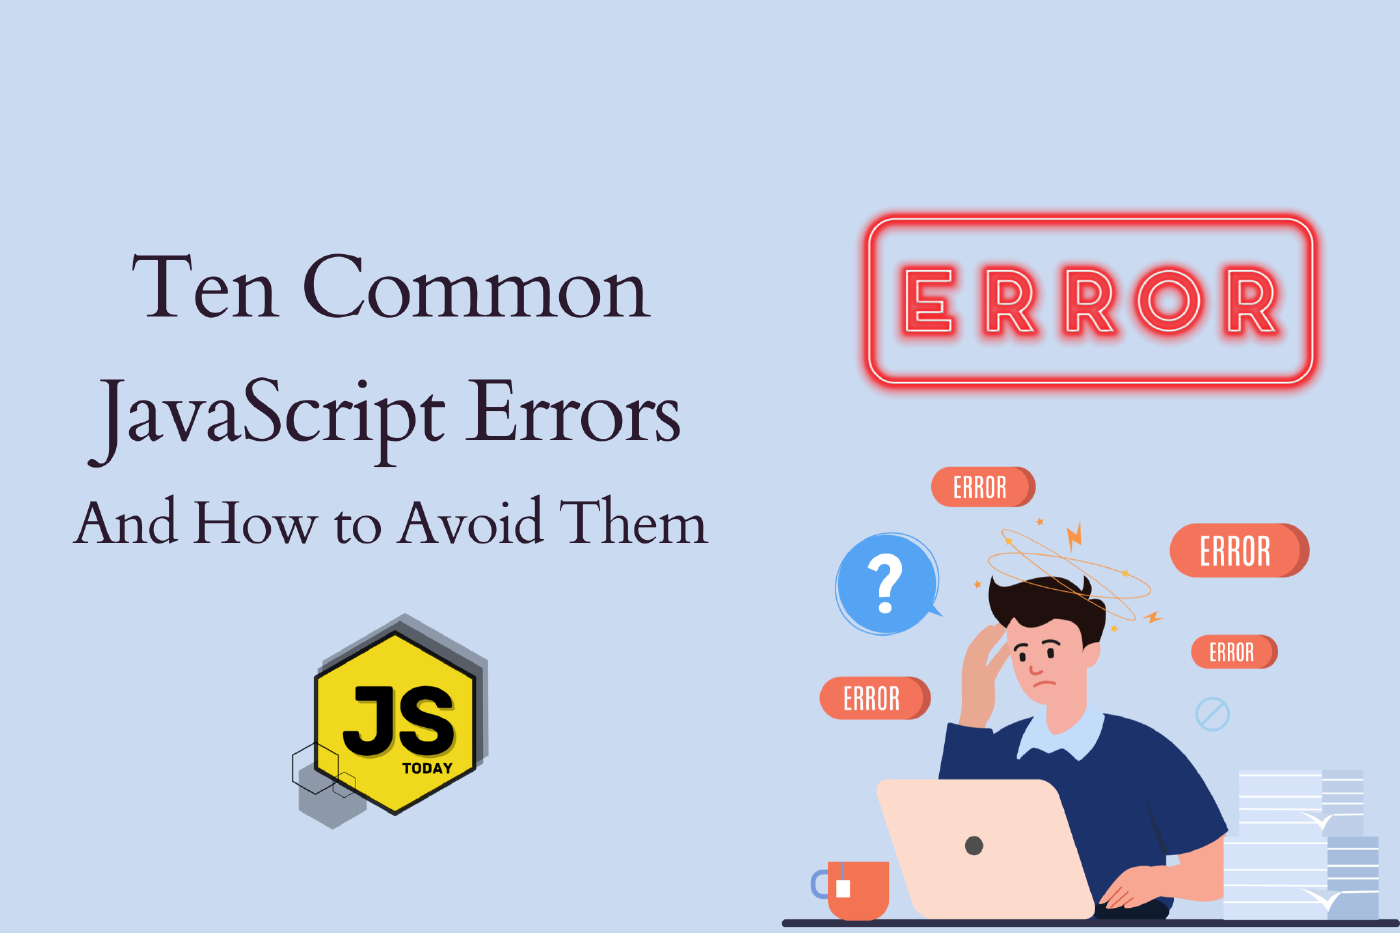 10 Common JavaScript Errors and How to Avoid Them